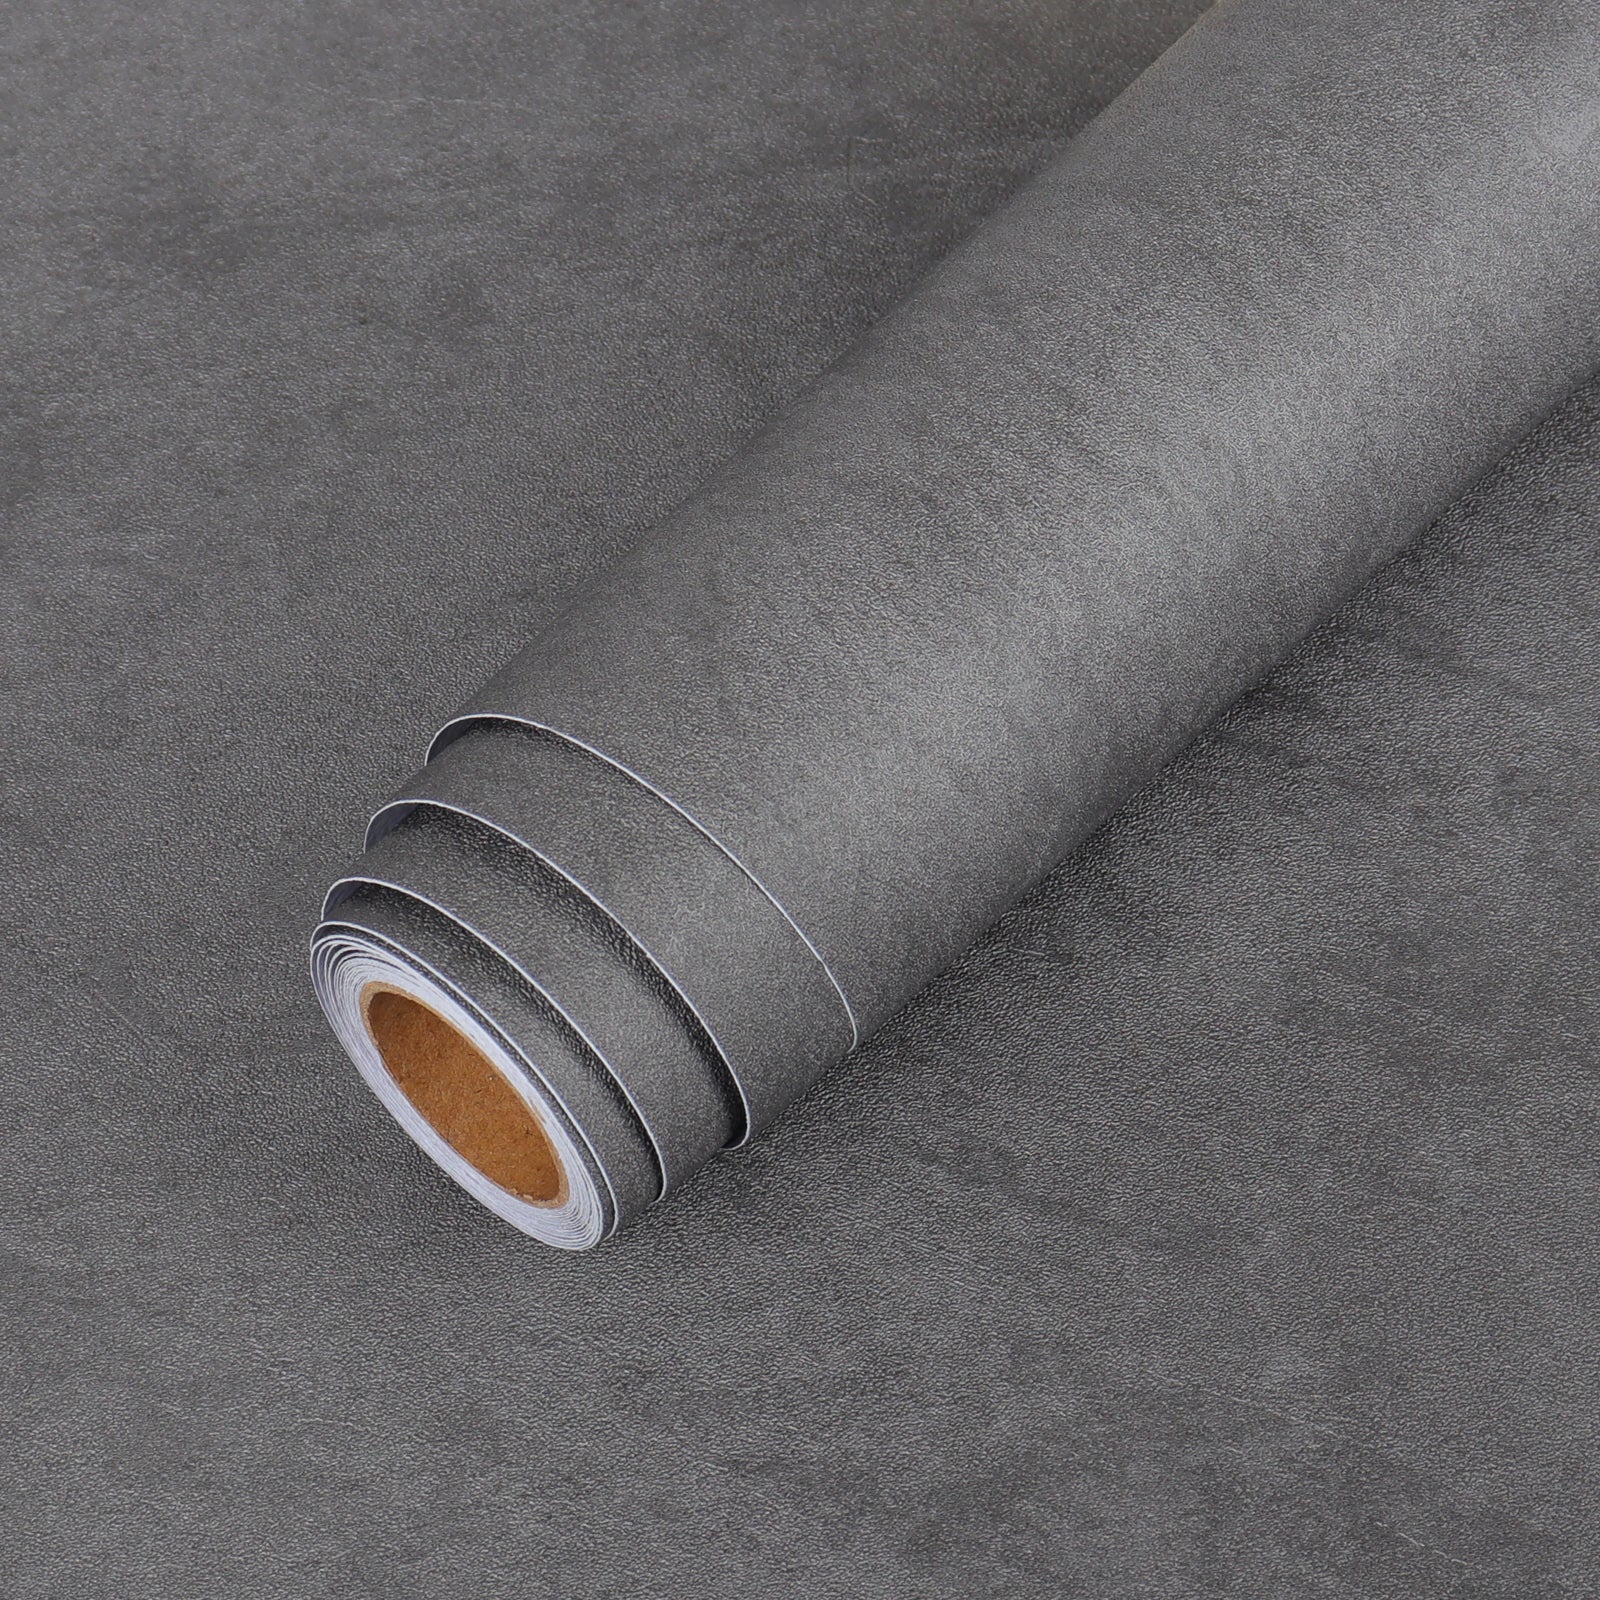 LaCheery Extra Thick Matte Concrete Wallpaper Stick and Peel Wall Pape